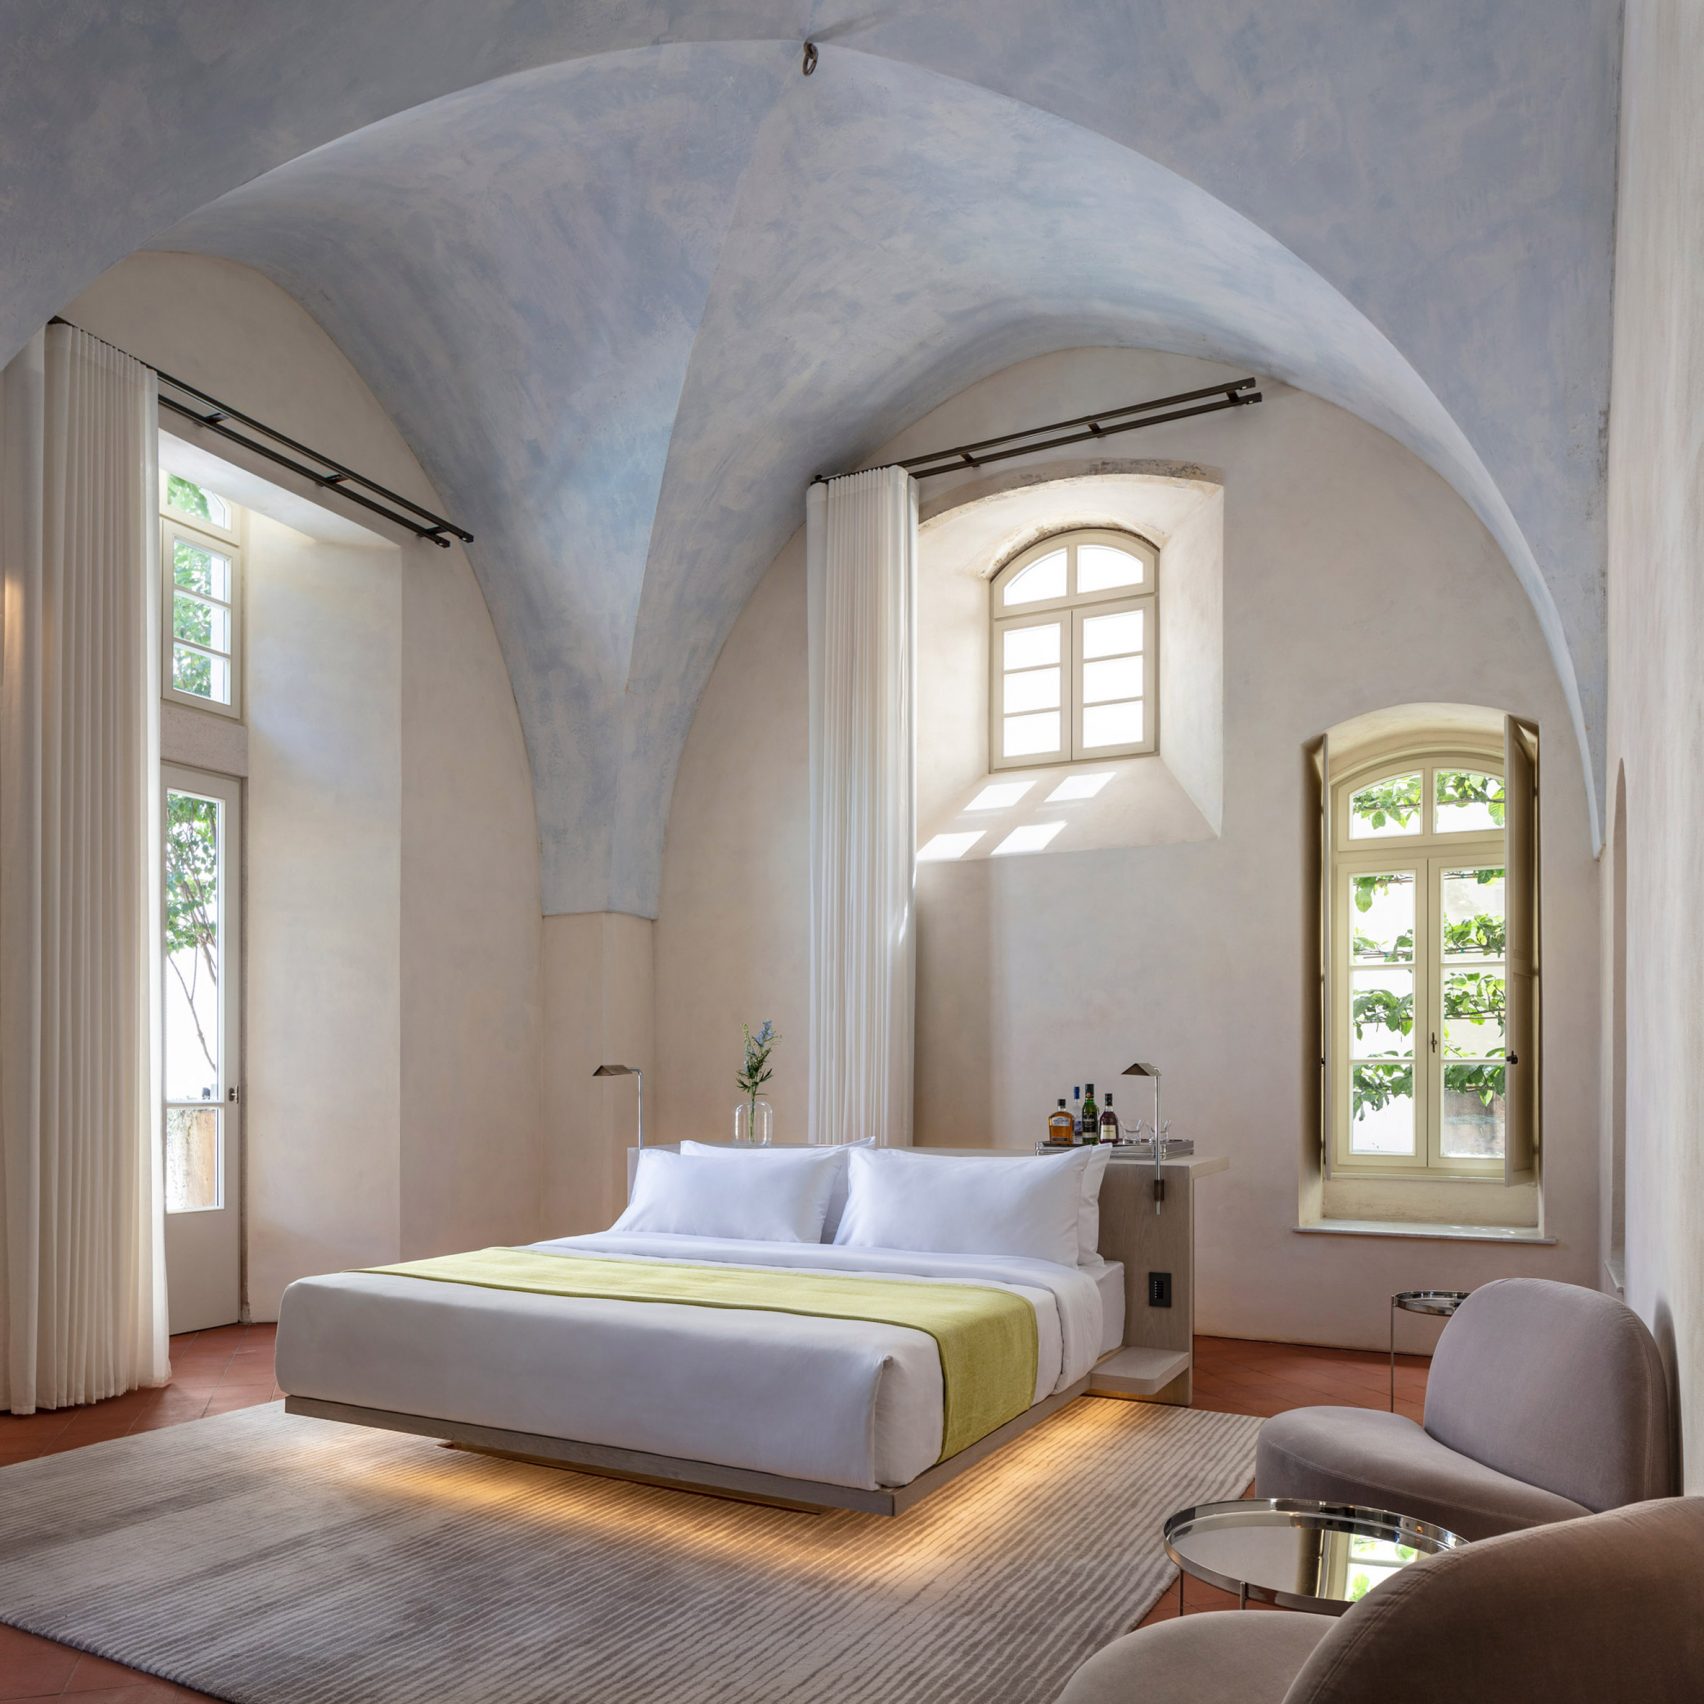 One of the bedrooms inside the Jaffa, complete with a vaulted ceiling